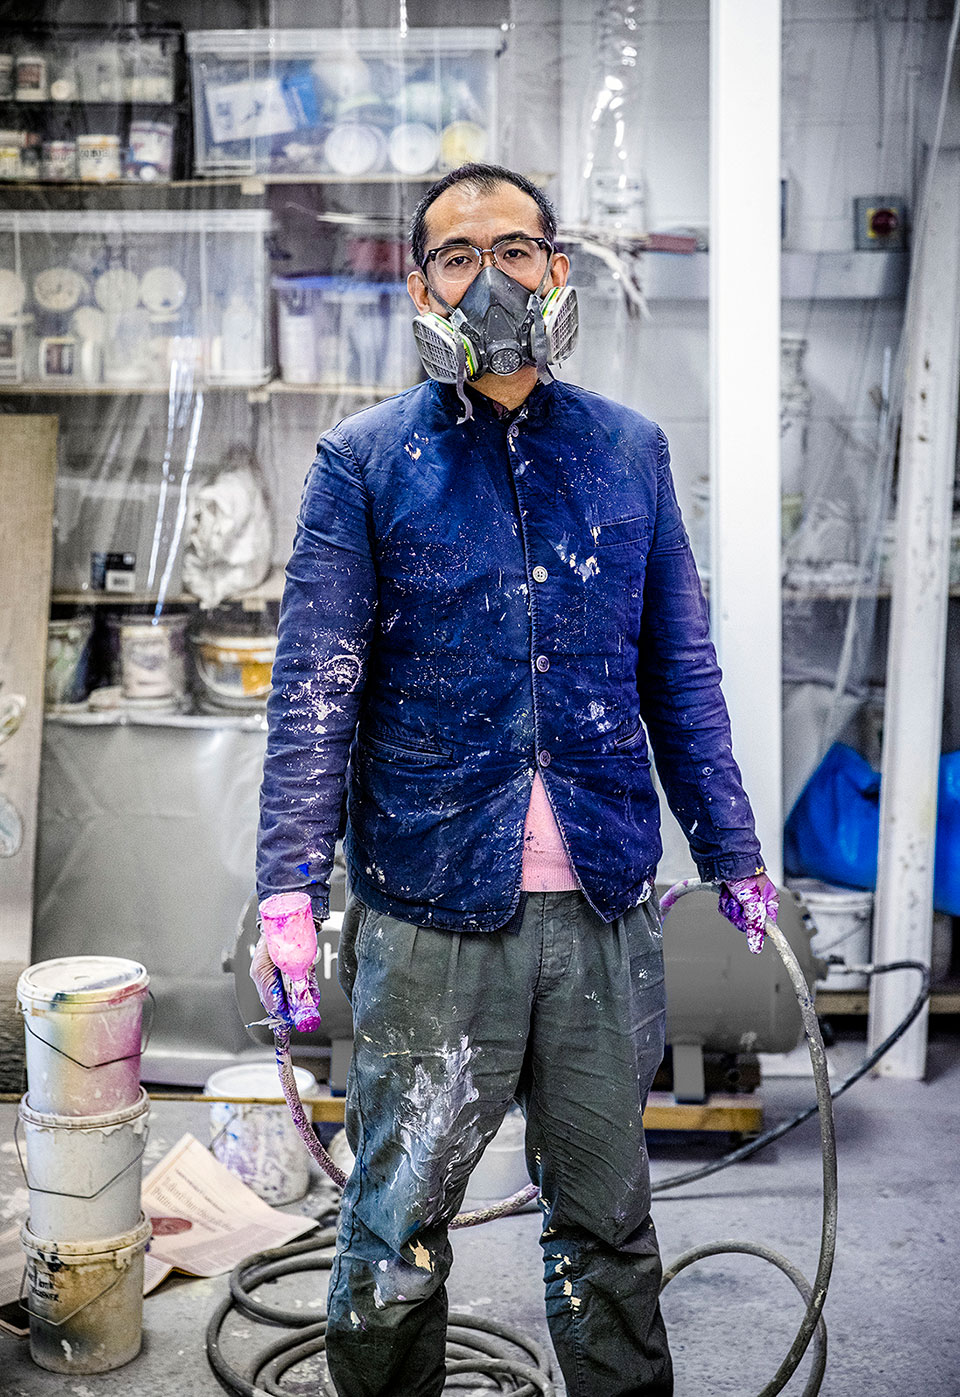 The artist Gordon Cheung wearing a mask ready to spray paint a new picture. Portrait photo by Richard Boll of London.